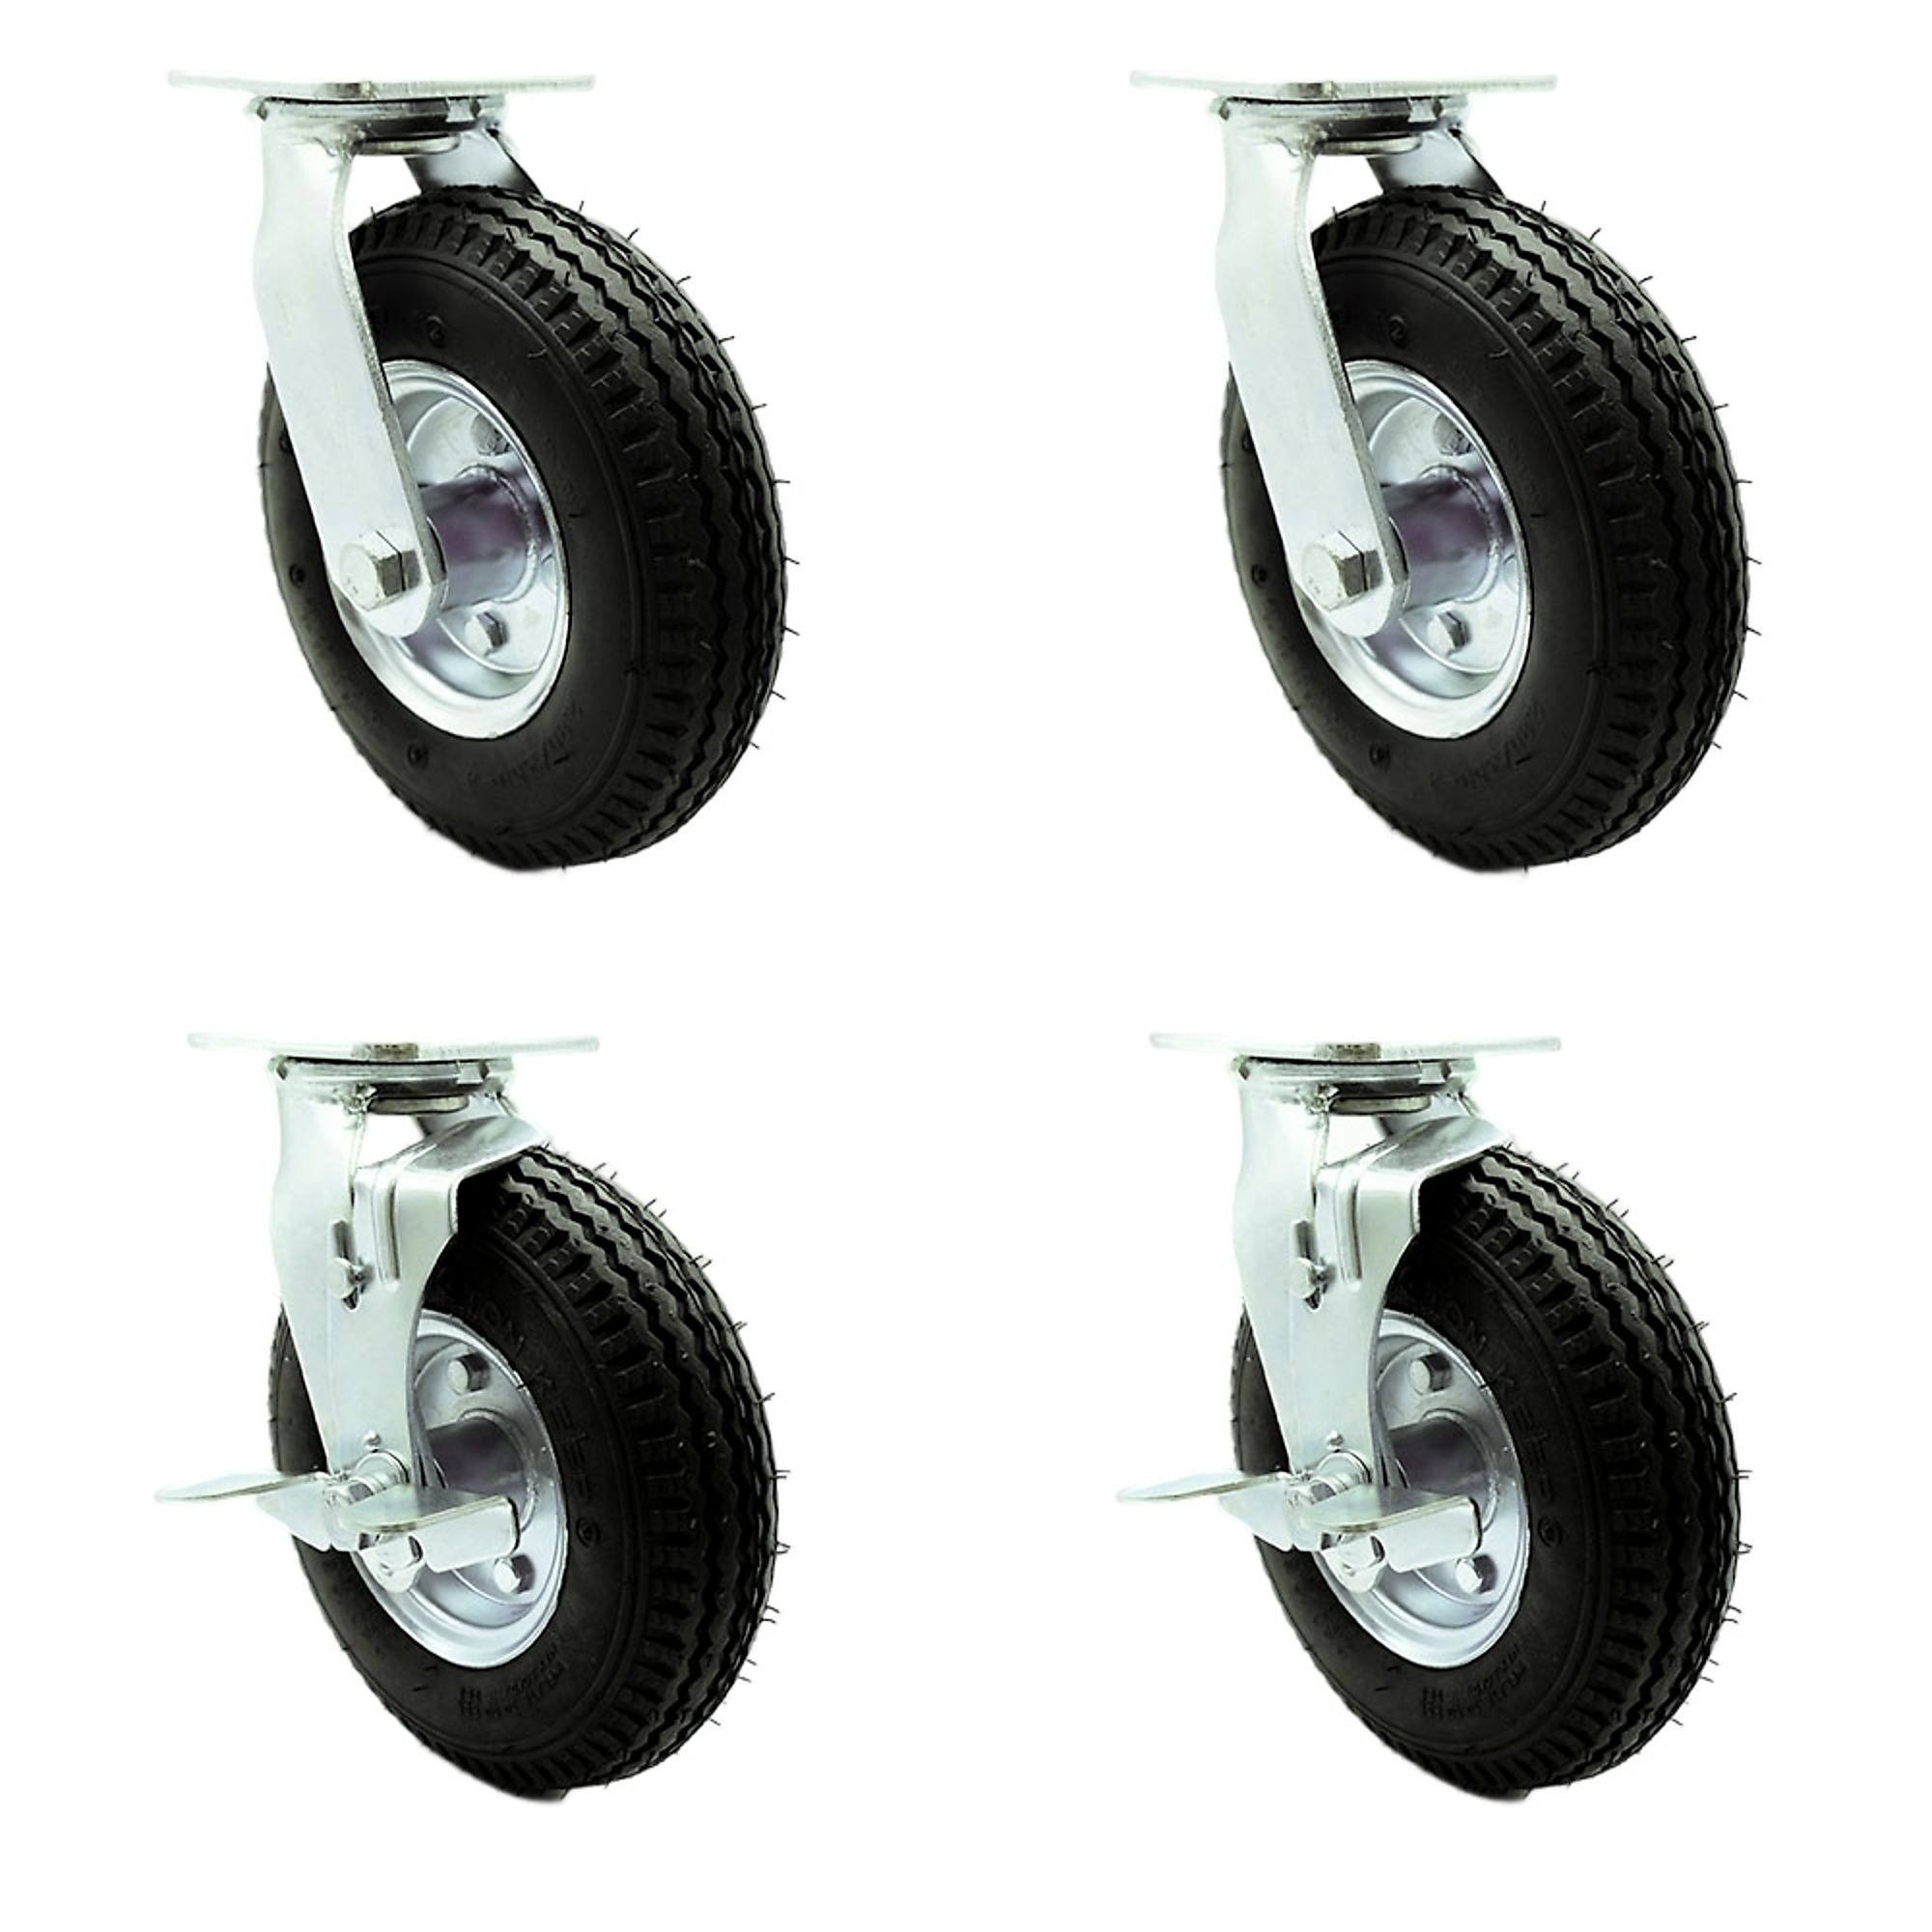 8Inch x 2 1/2Inch Plate Casters, Wheel Diameter 8 in, Caster Type Swivel, Package (qty.) 4, Model - Service Caster SCC-100S280-PNB-2-TLB-2